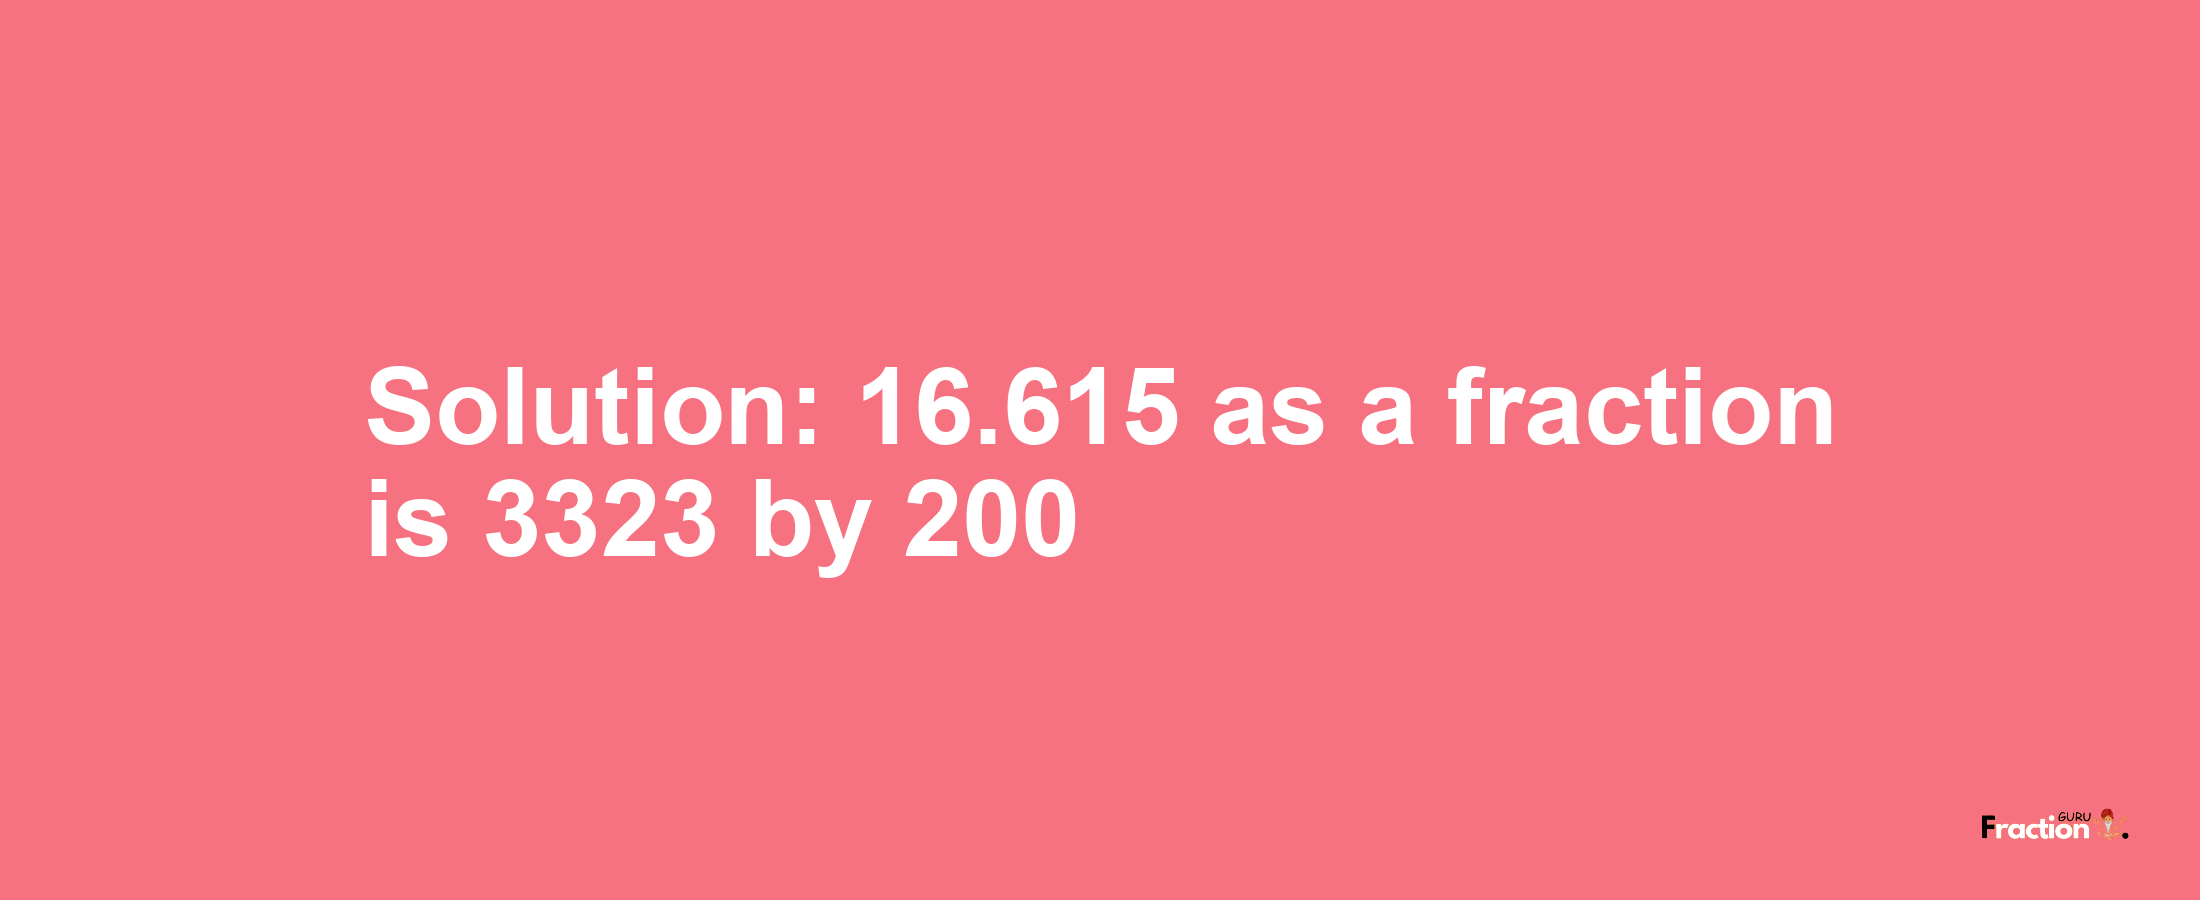 Solution:16.615 as a fraction is 3323/200